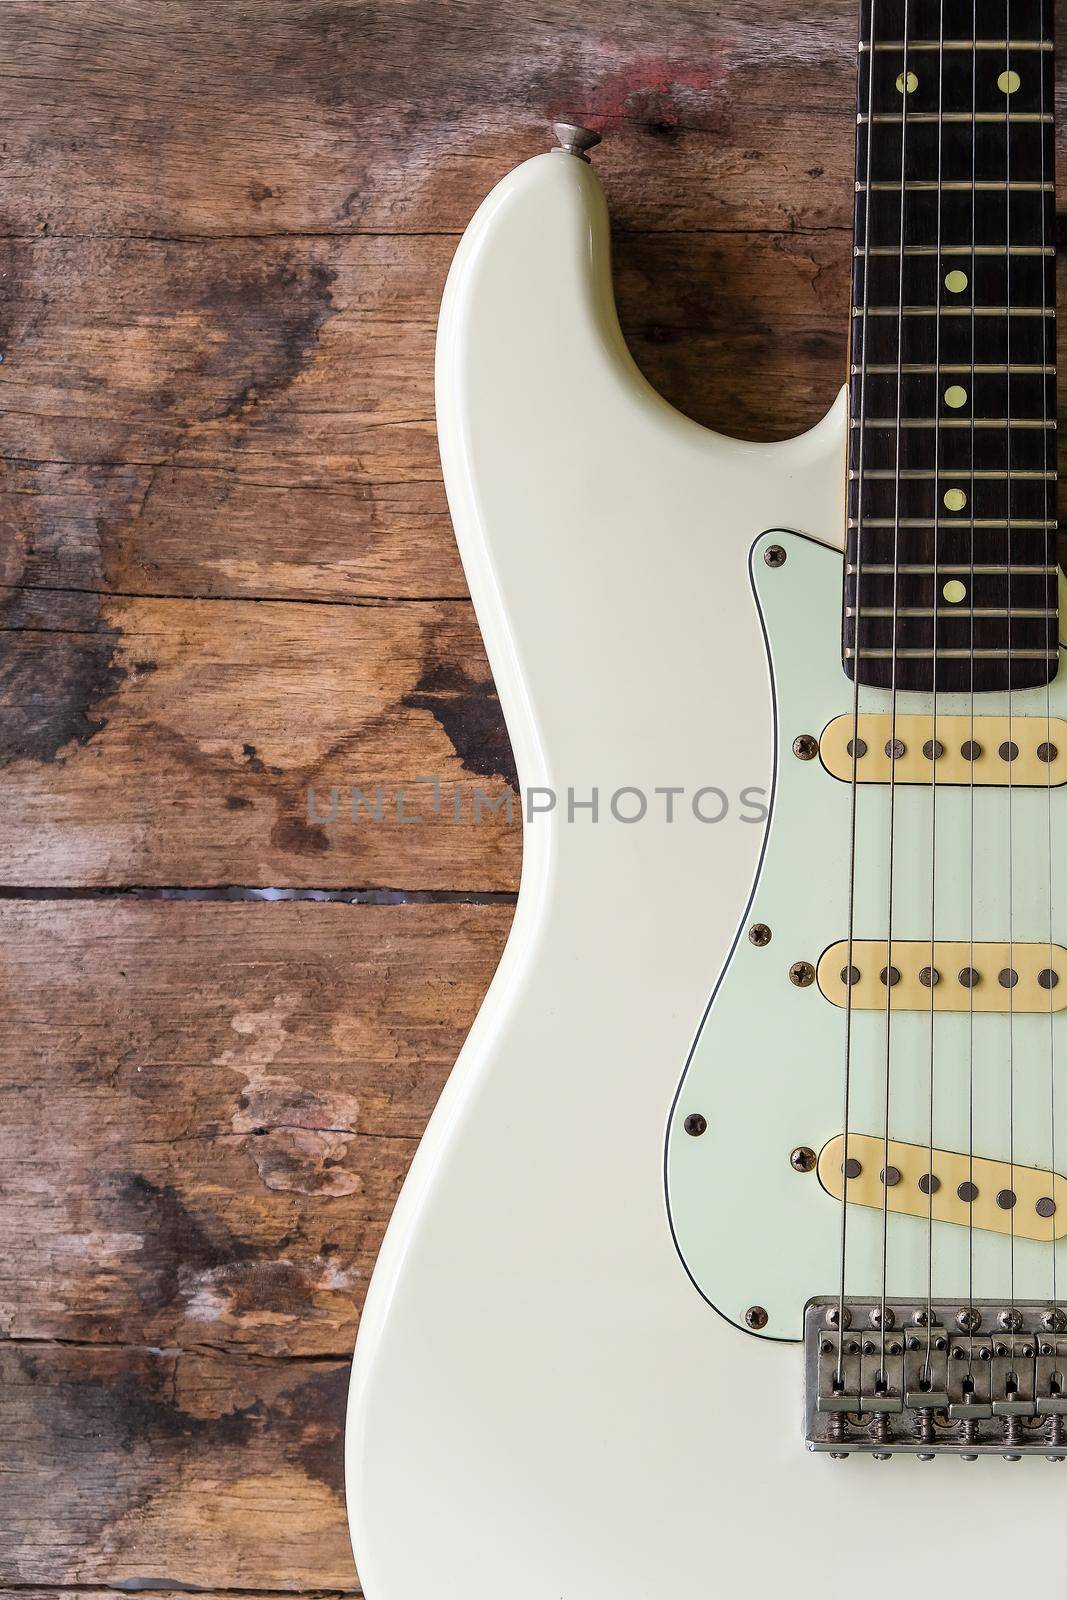 Acoustic Guitar on a wood background by ponsulak